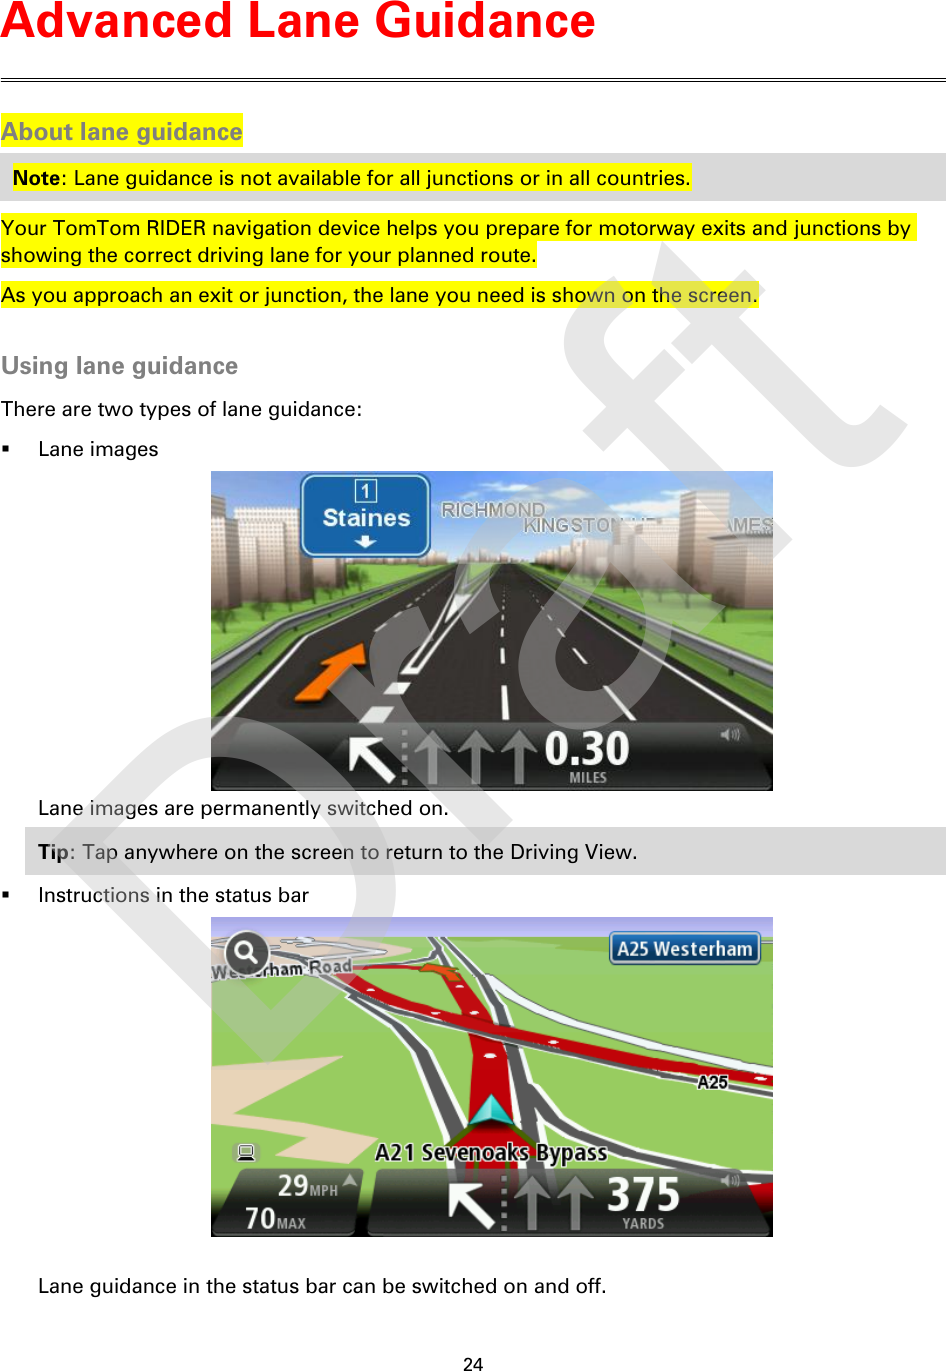 24    About lane guidance Note: Lane guidance is not available for all junctions or in all countries. Your TomTom RIDER navigation device helps you prepare for motorway exits and junctions by showing the correct driving lane for your planned route. As you approach an exit or junction, the lane you need is shown on the screen.  Using lane guidance There are two types of lane guidance:  Lane images  Lane images are permanently switched on. Tip: Tap anywhere on the screen to return to the Driving View.  Instructions in the status bar   Lane guidance in the status bar can be switched on and off. Advanced Lane Guidance Draft